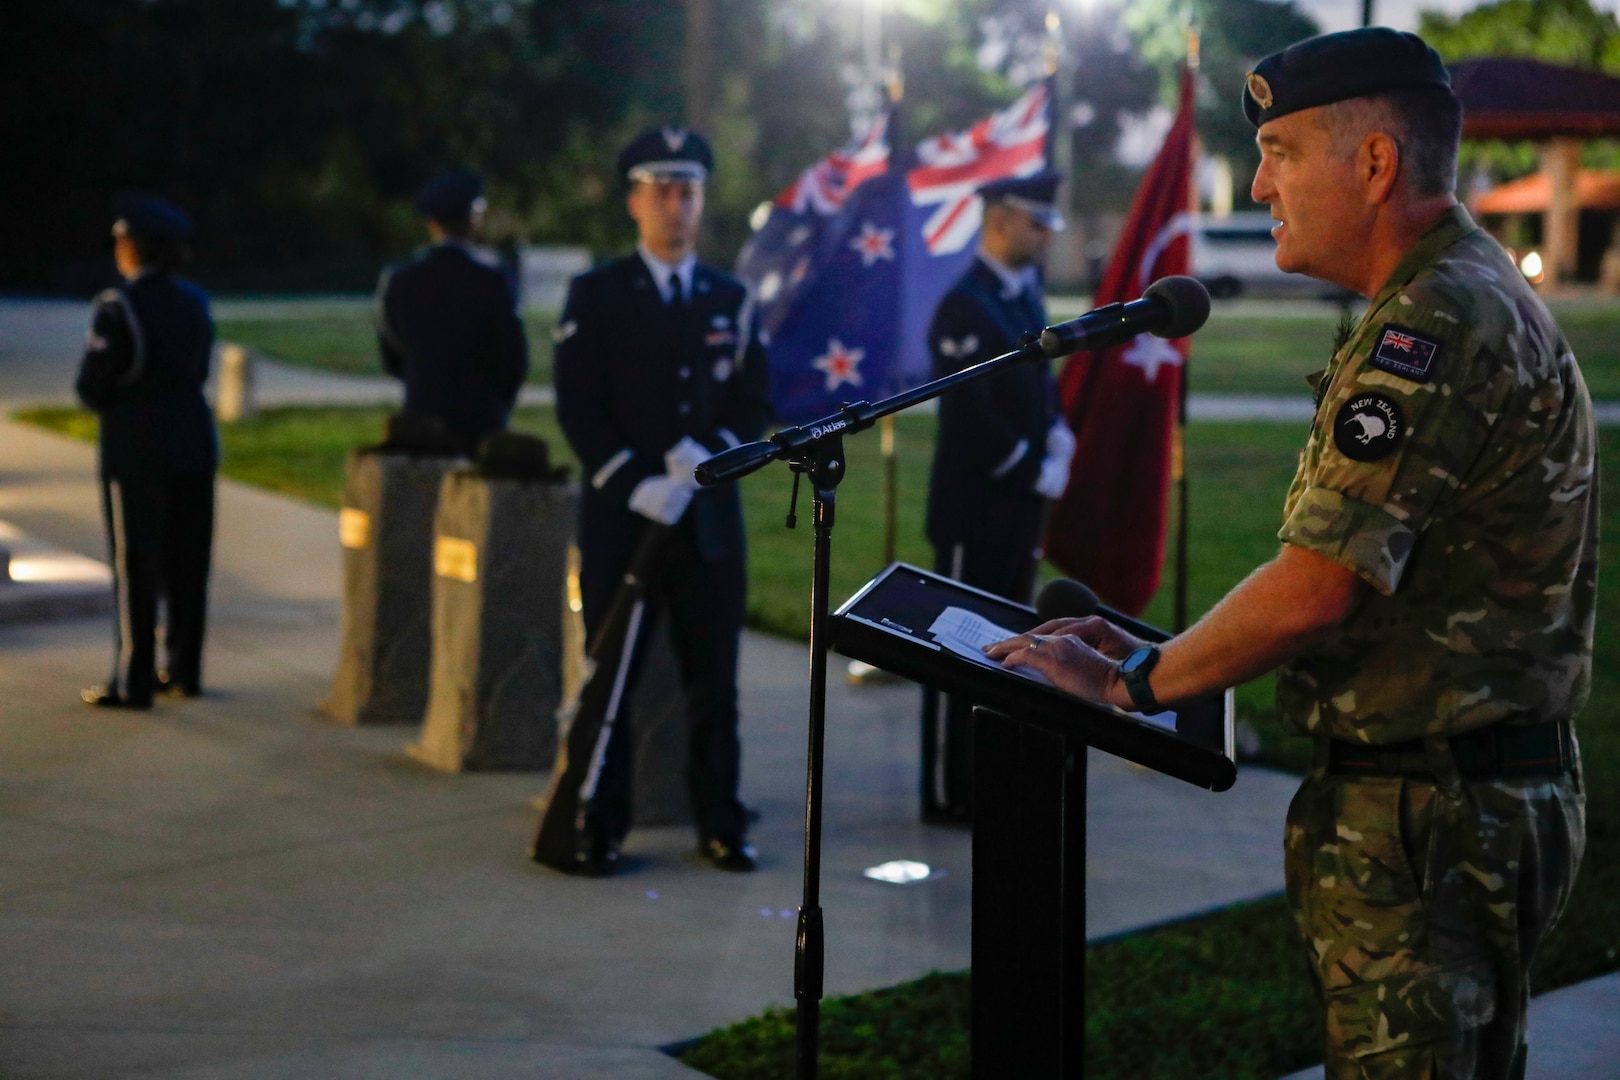 TAMPA, Fla. – New Zealand Army Lt. Col. Jason Hutchings, a senior national representative (SNR) at U.S. Central Command, addresses attendees during an ANZAC Day dawn service at MacDill Air Force Base, April 25, 2022. Though repelled by Ottoman forces, Australian and New Zealand Army Corps (ANZAC) Day commemorates the World War I campaign when Australian and New Zealand forces stood together in effort to capture the Gallipoli Peninsula. ANZAC Day is a day of remembrance in Australia and New Zealand to honor those who served and died in military operations. (U.S. Central Command Public Affairs photo by Tom Gagnier)